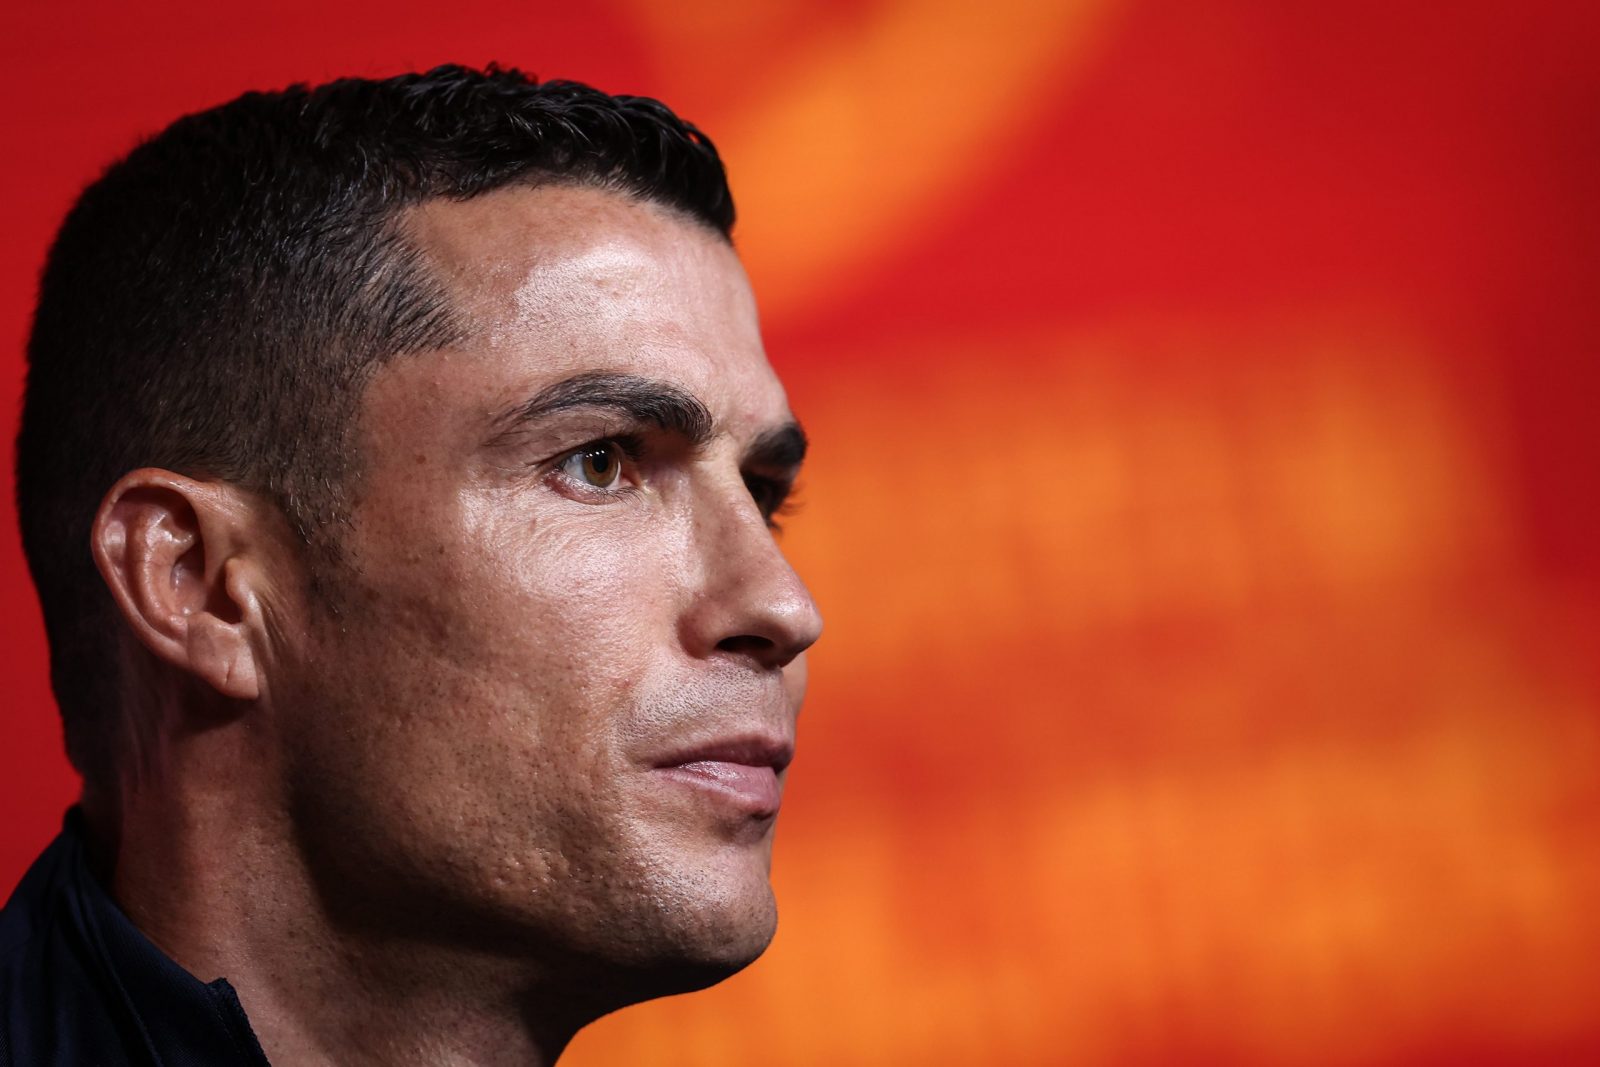 epa10537192 Portugal's player Cristiano Ronaldo attends a press conference at Cidade do Futebol in Oeiras, on the outskirts of Lisbon, Portugal, 22 March 2023. Portugal play against Liechtenstein in the qualification for the UEFA EURO 2024 on 23 March.  EPA/RODRIGO ANTUNES